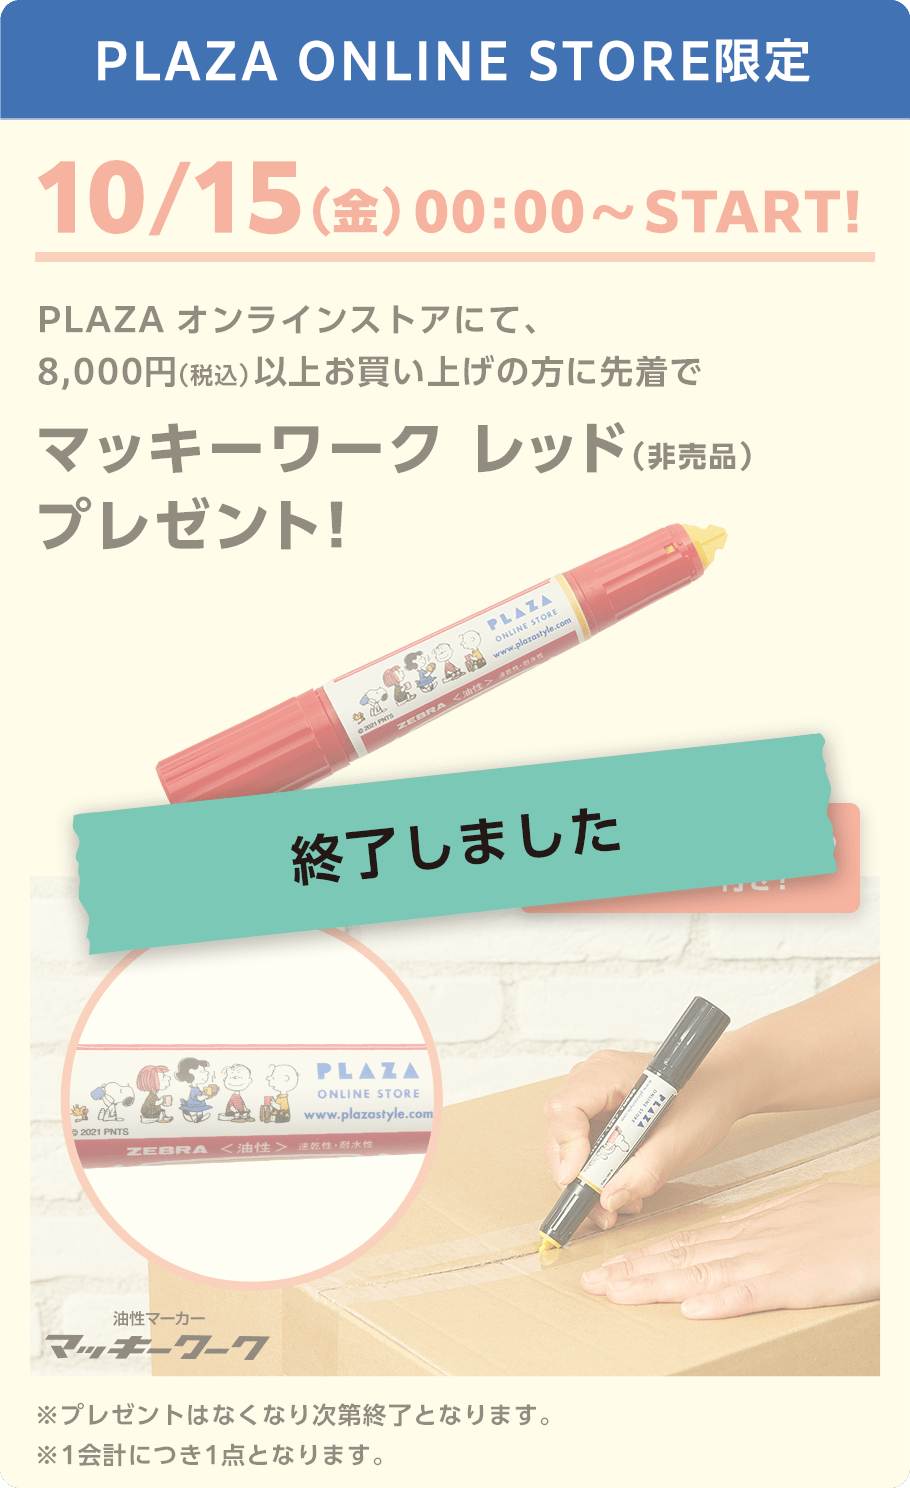 PLAZA ONLINE STORE限定　マッキーワーク レッド（非売品）プレゼント！